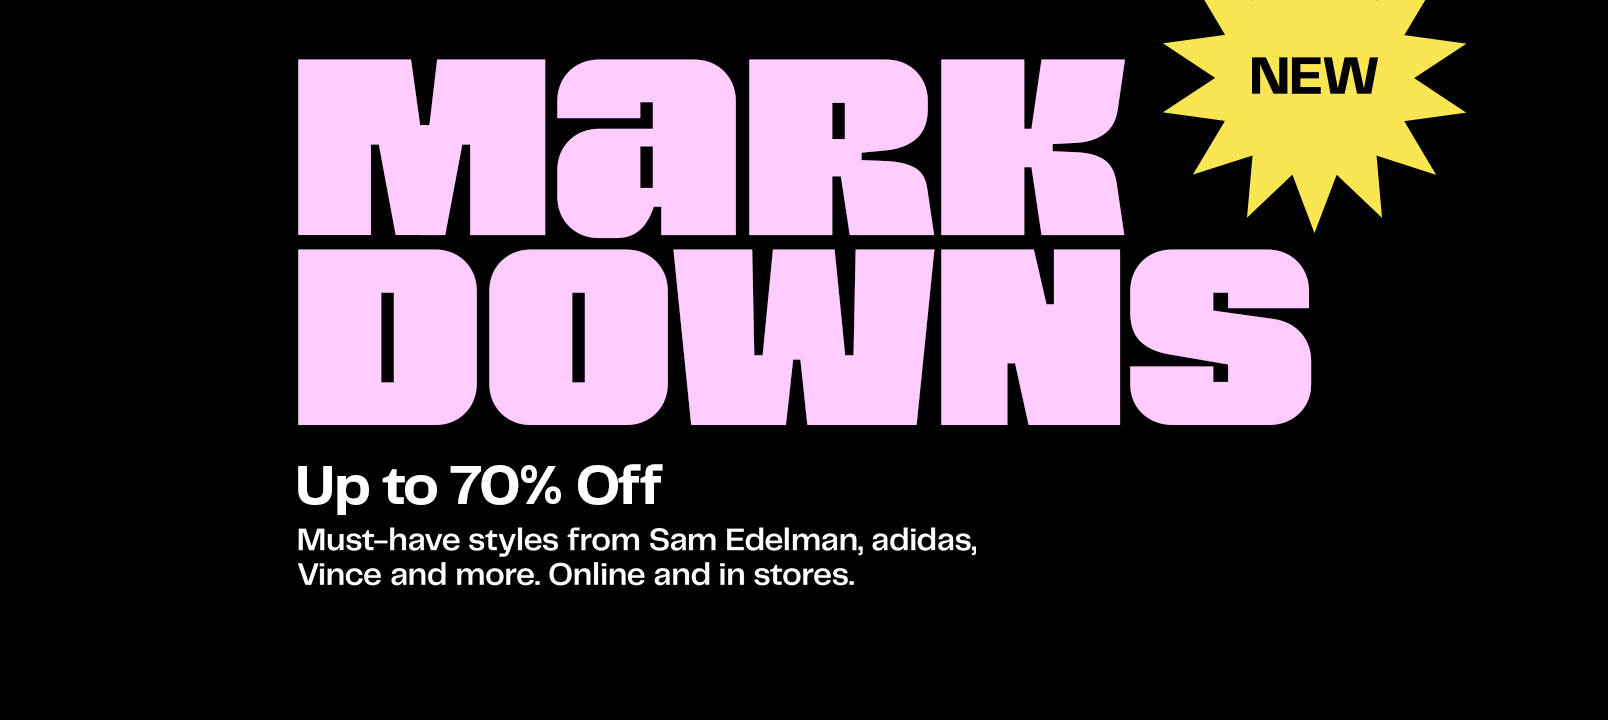 New markdowns. Up to seventy percent off. Must-have styles from Sam Edelman, adidas, Vince and more. Online and in stores.